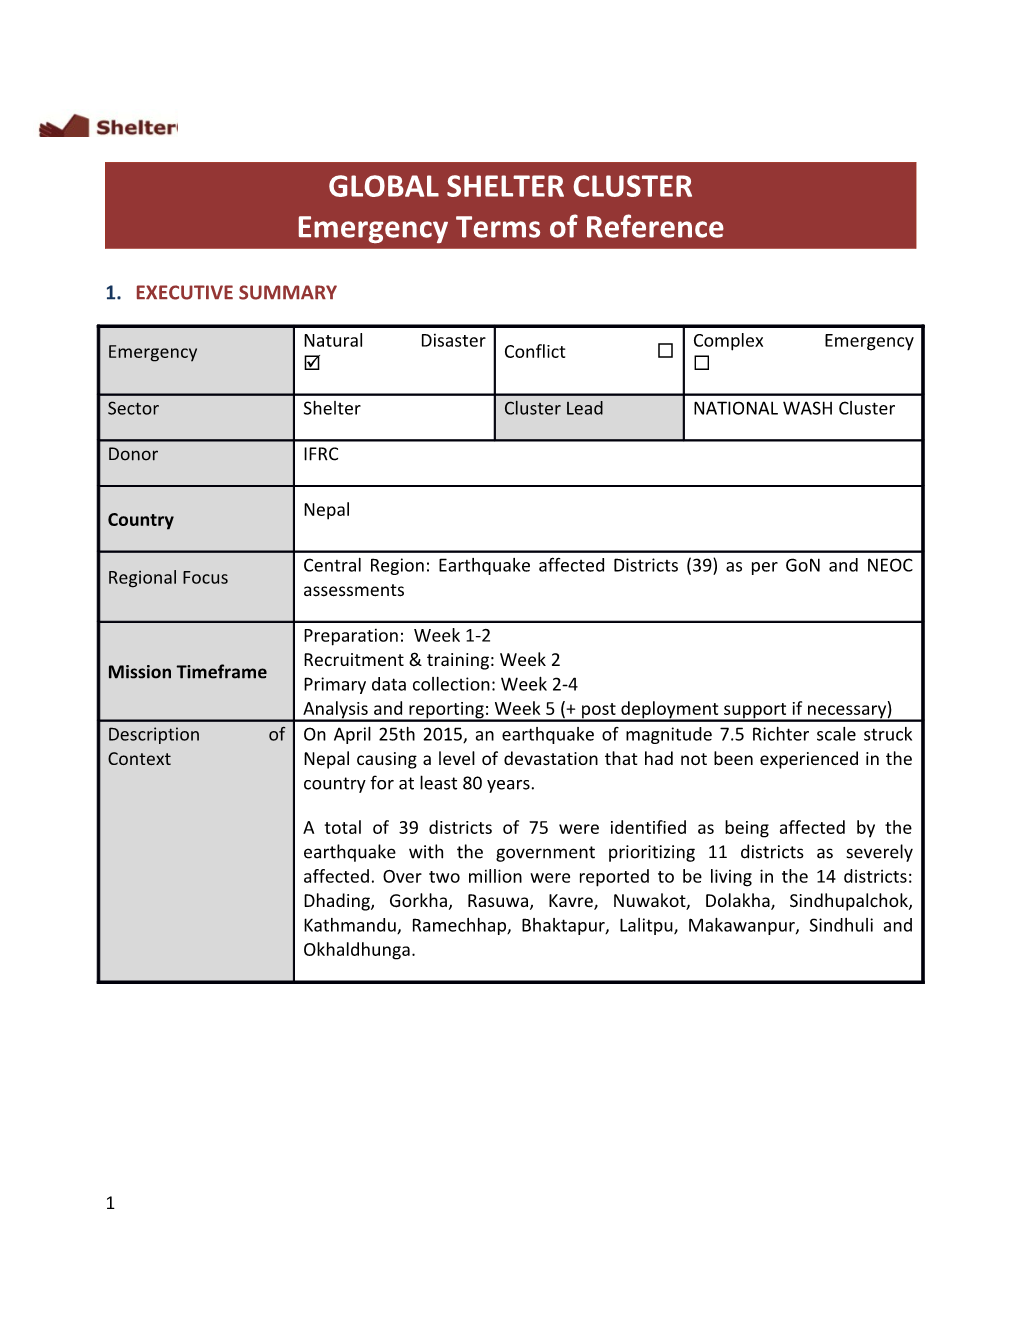 GLOBAL SHELTER CLUSTER Emergency Terms of Reference